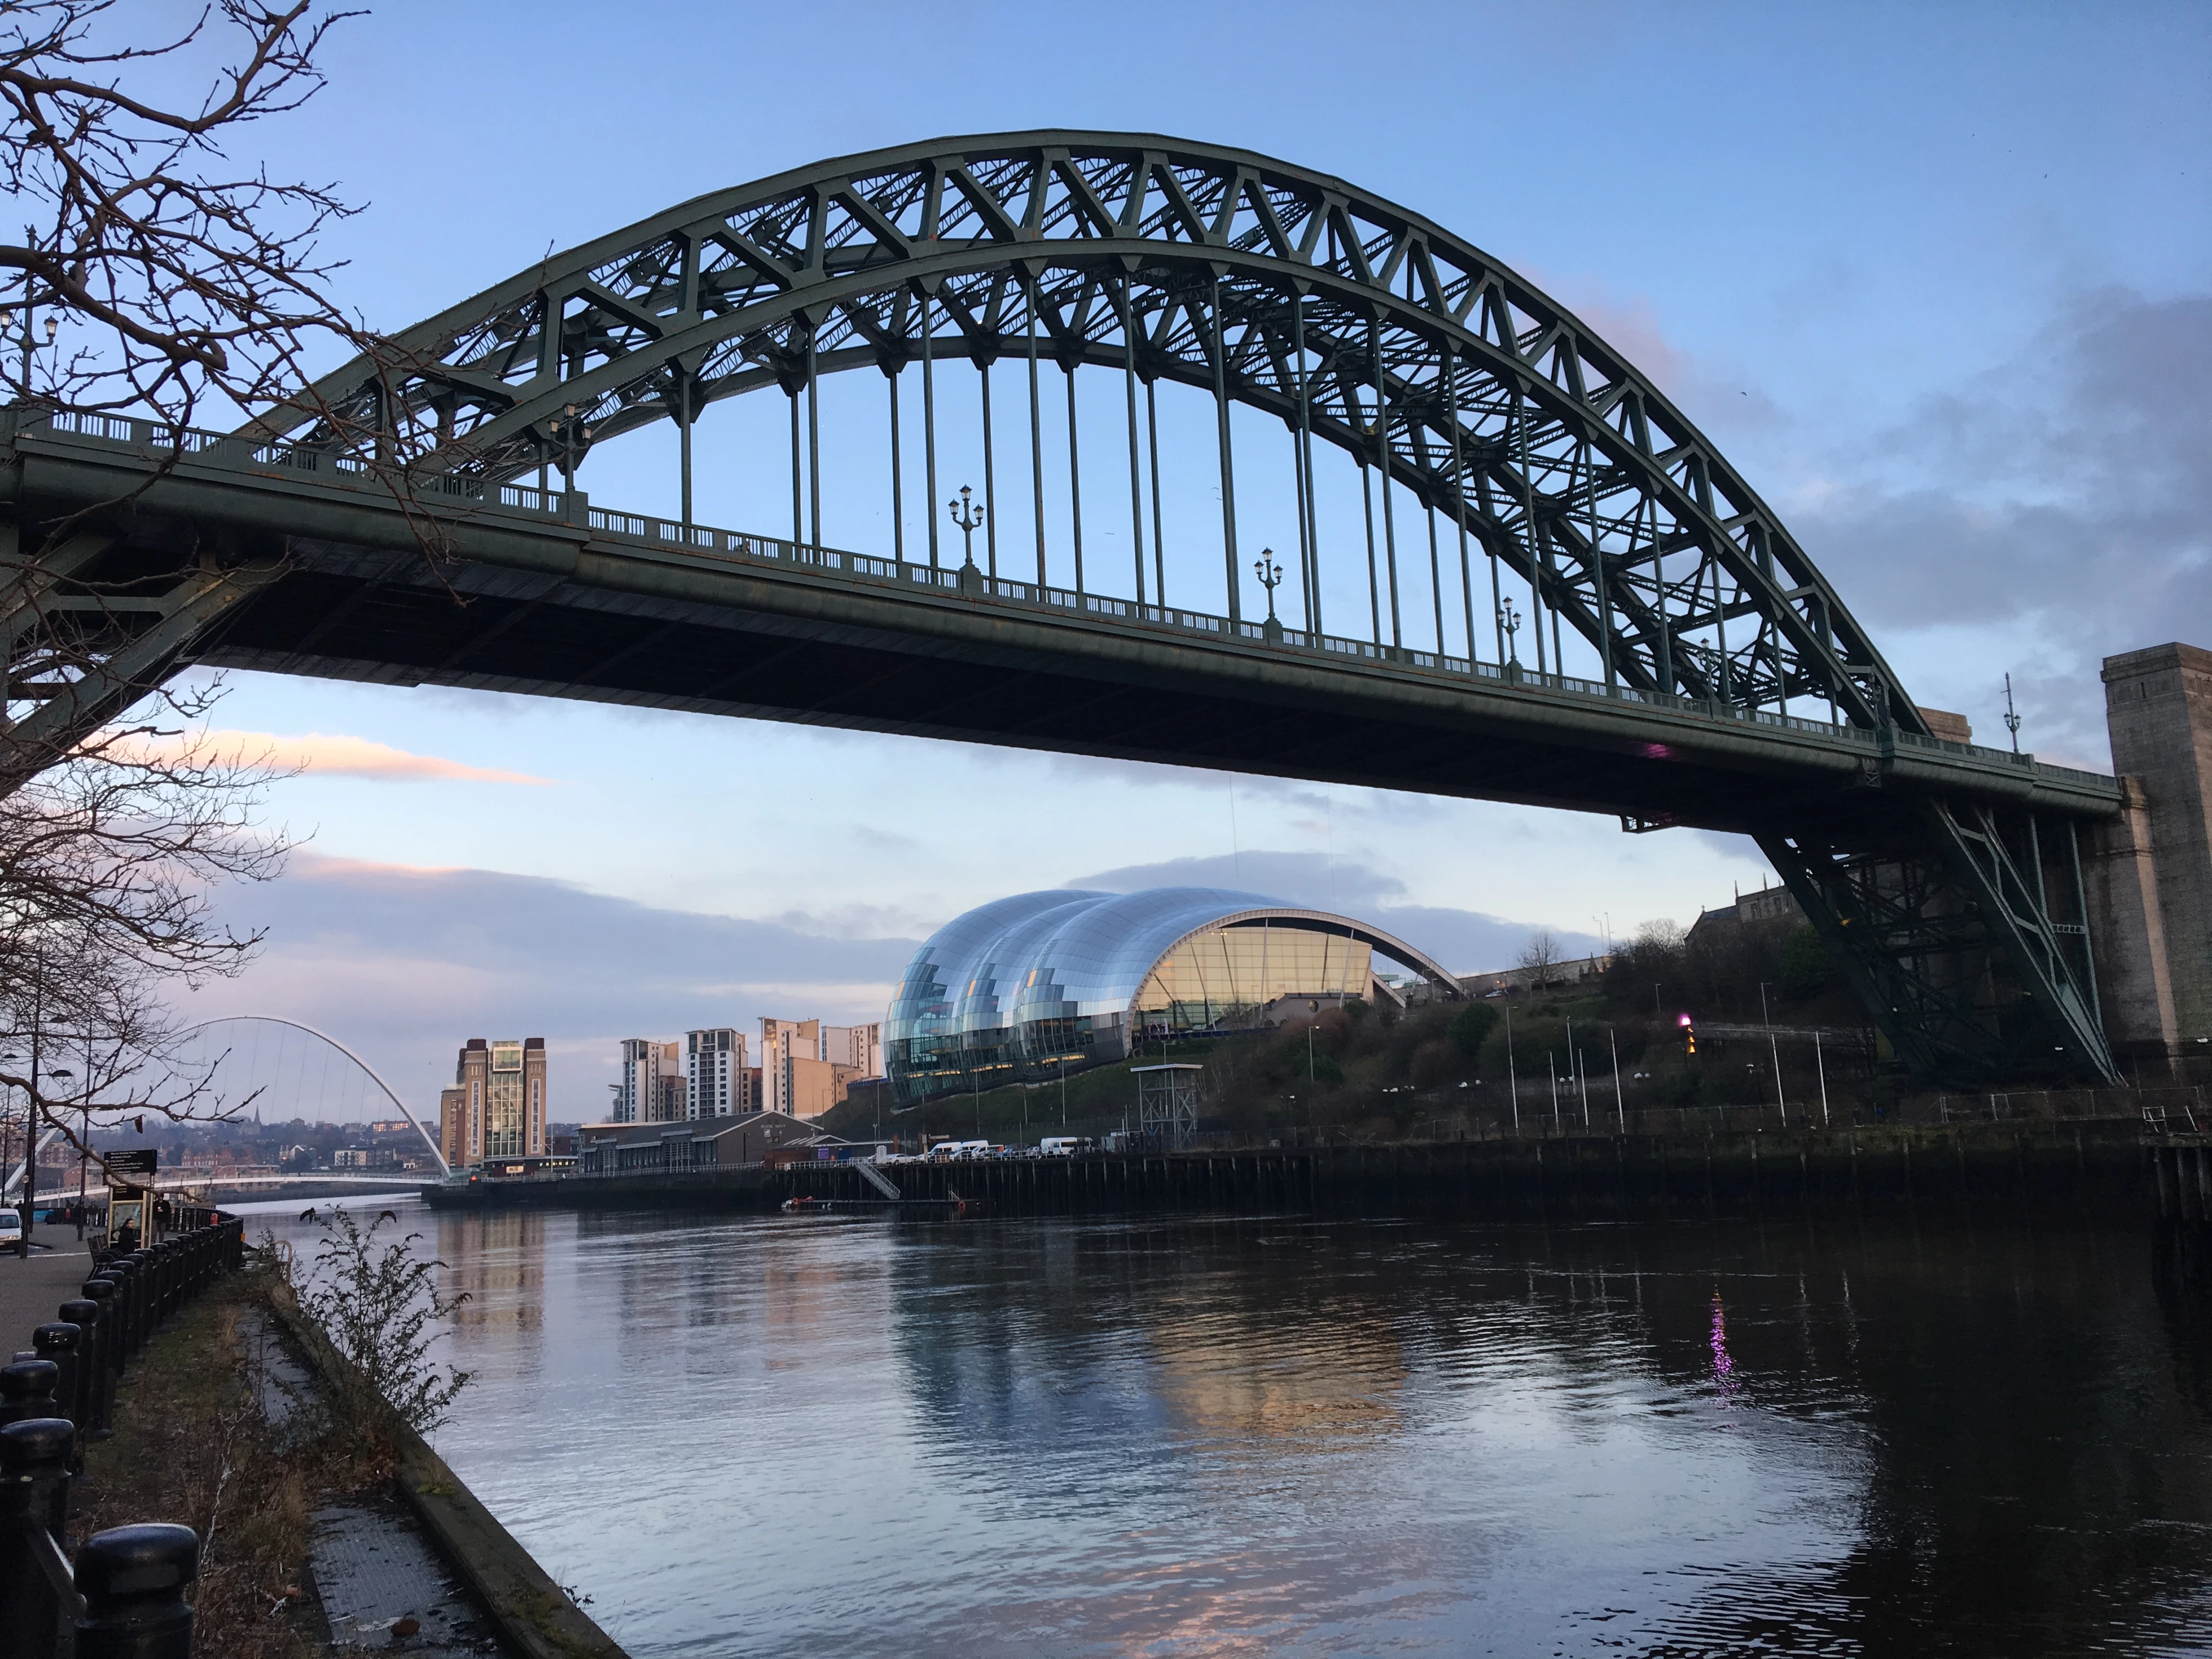 River Tyne, Newcastle-upon-Tyne. Looking downriver; in the foreground the Tyne Bridge, in the background the Sage Centre